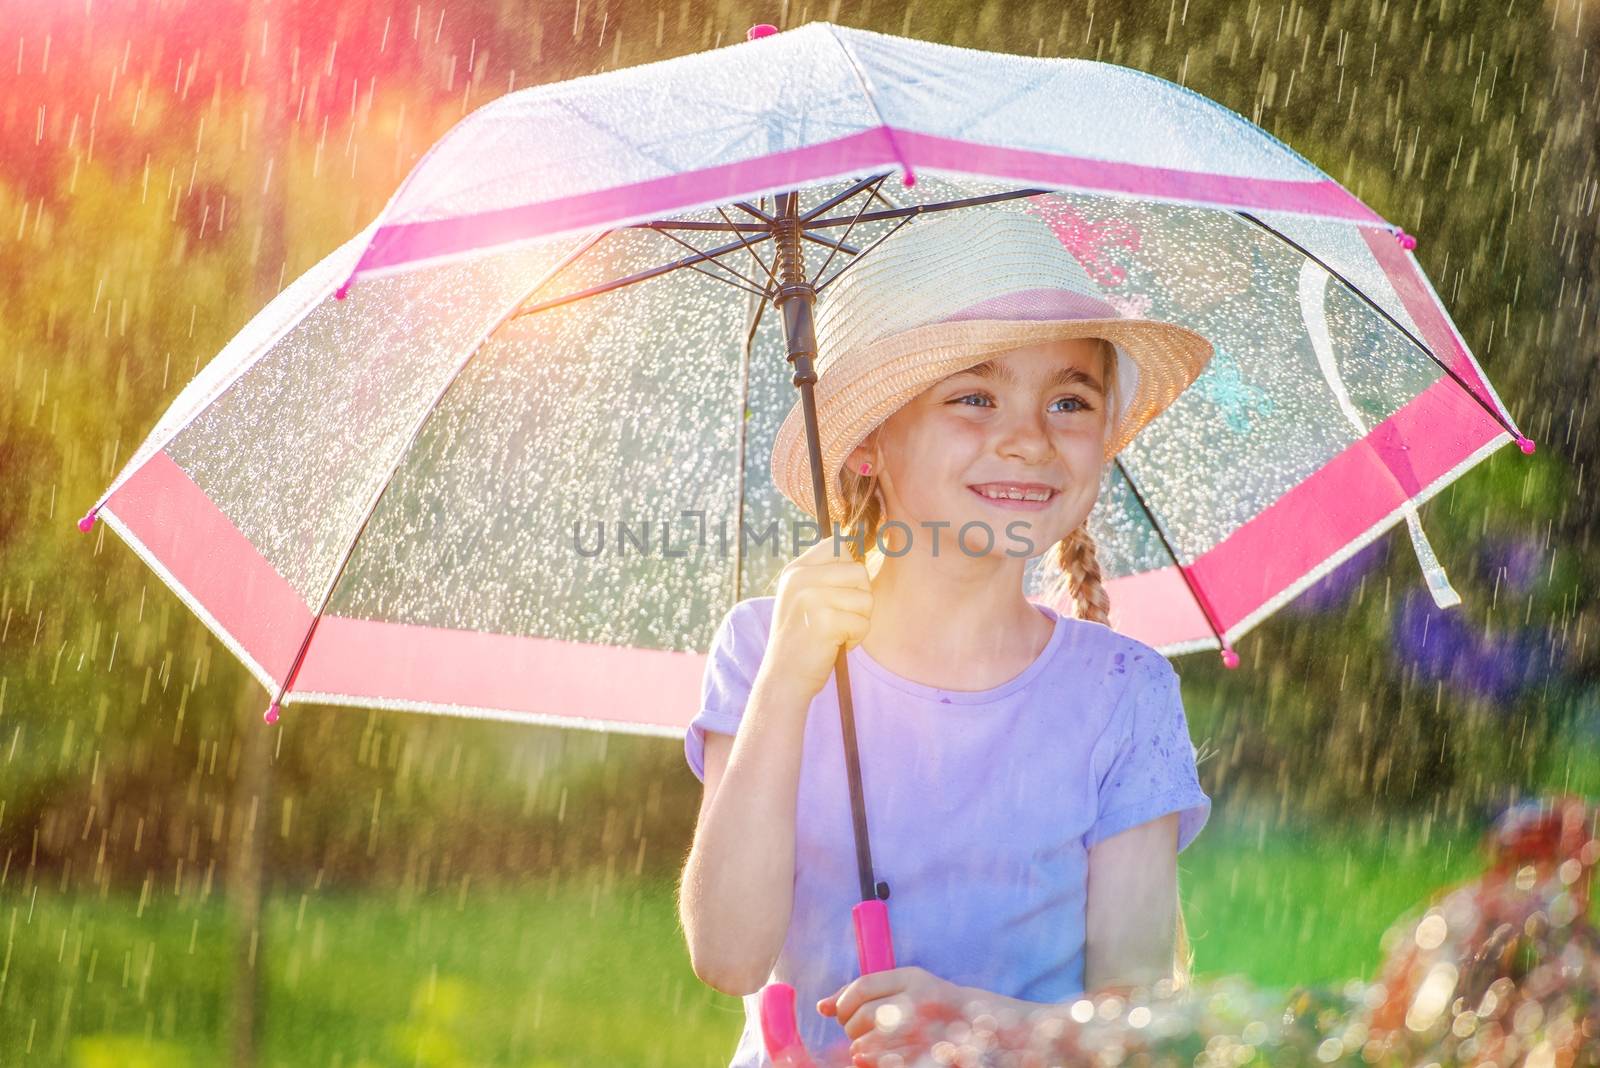 Rainy Weather Outdoor Fun by welcomia